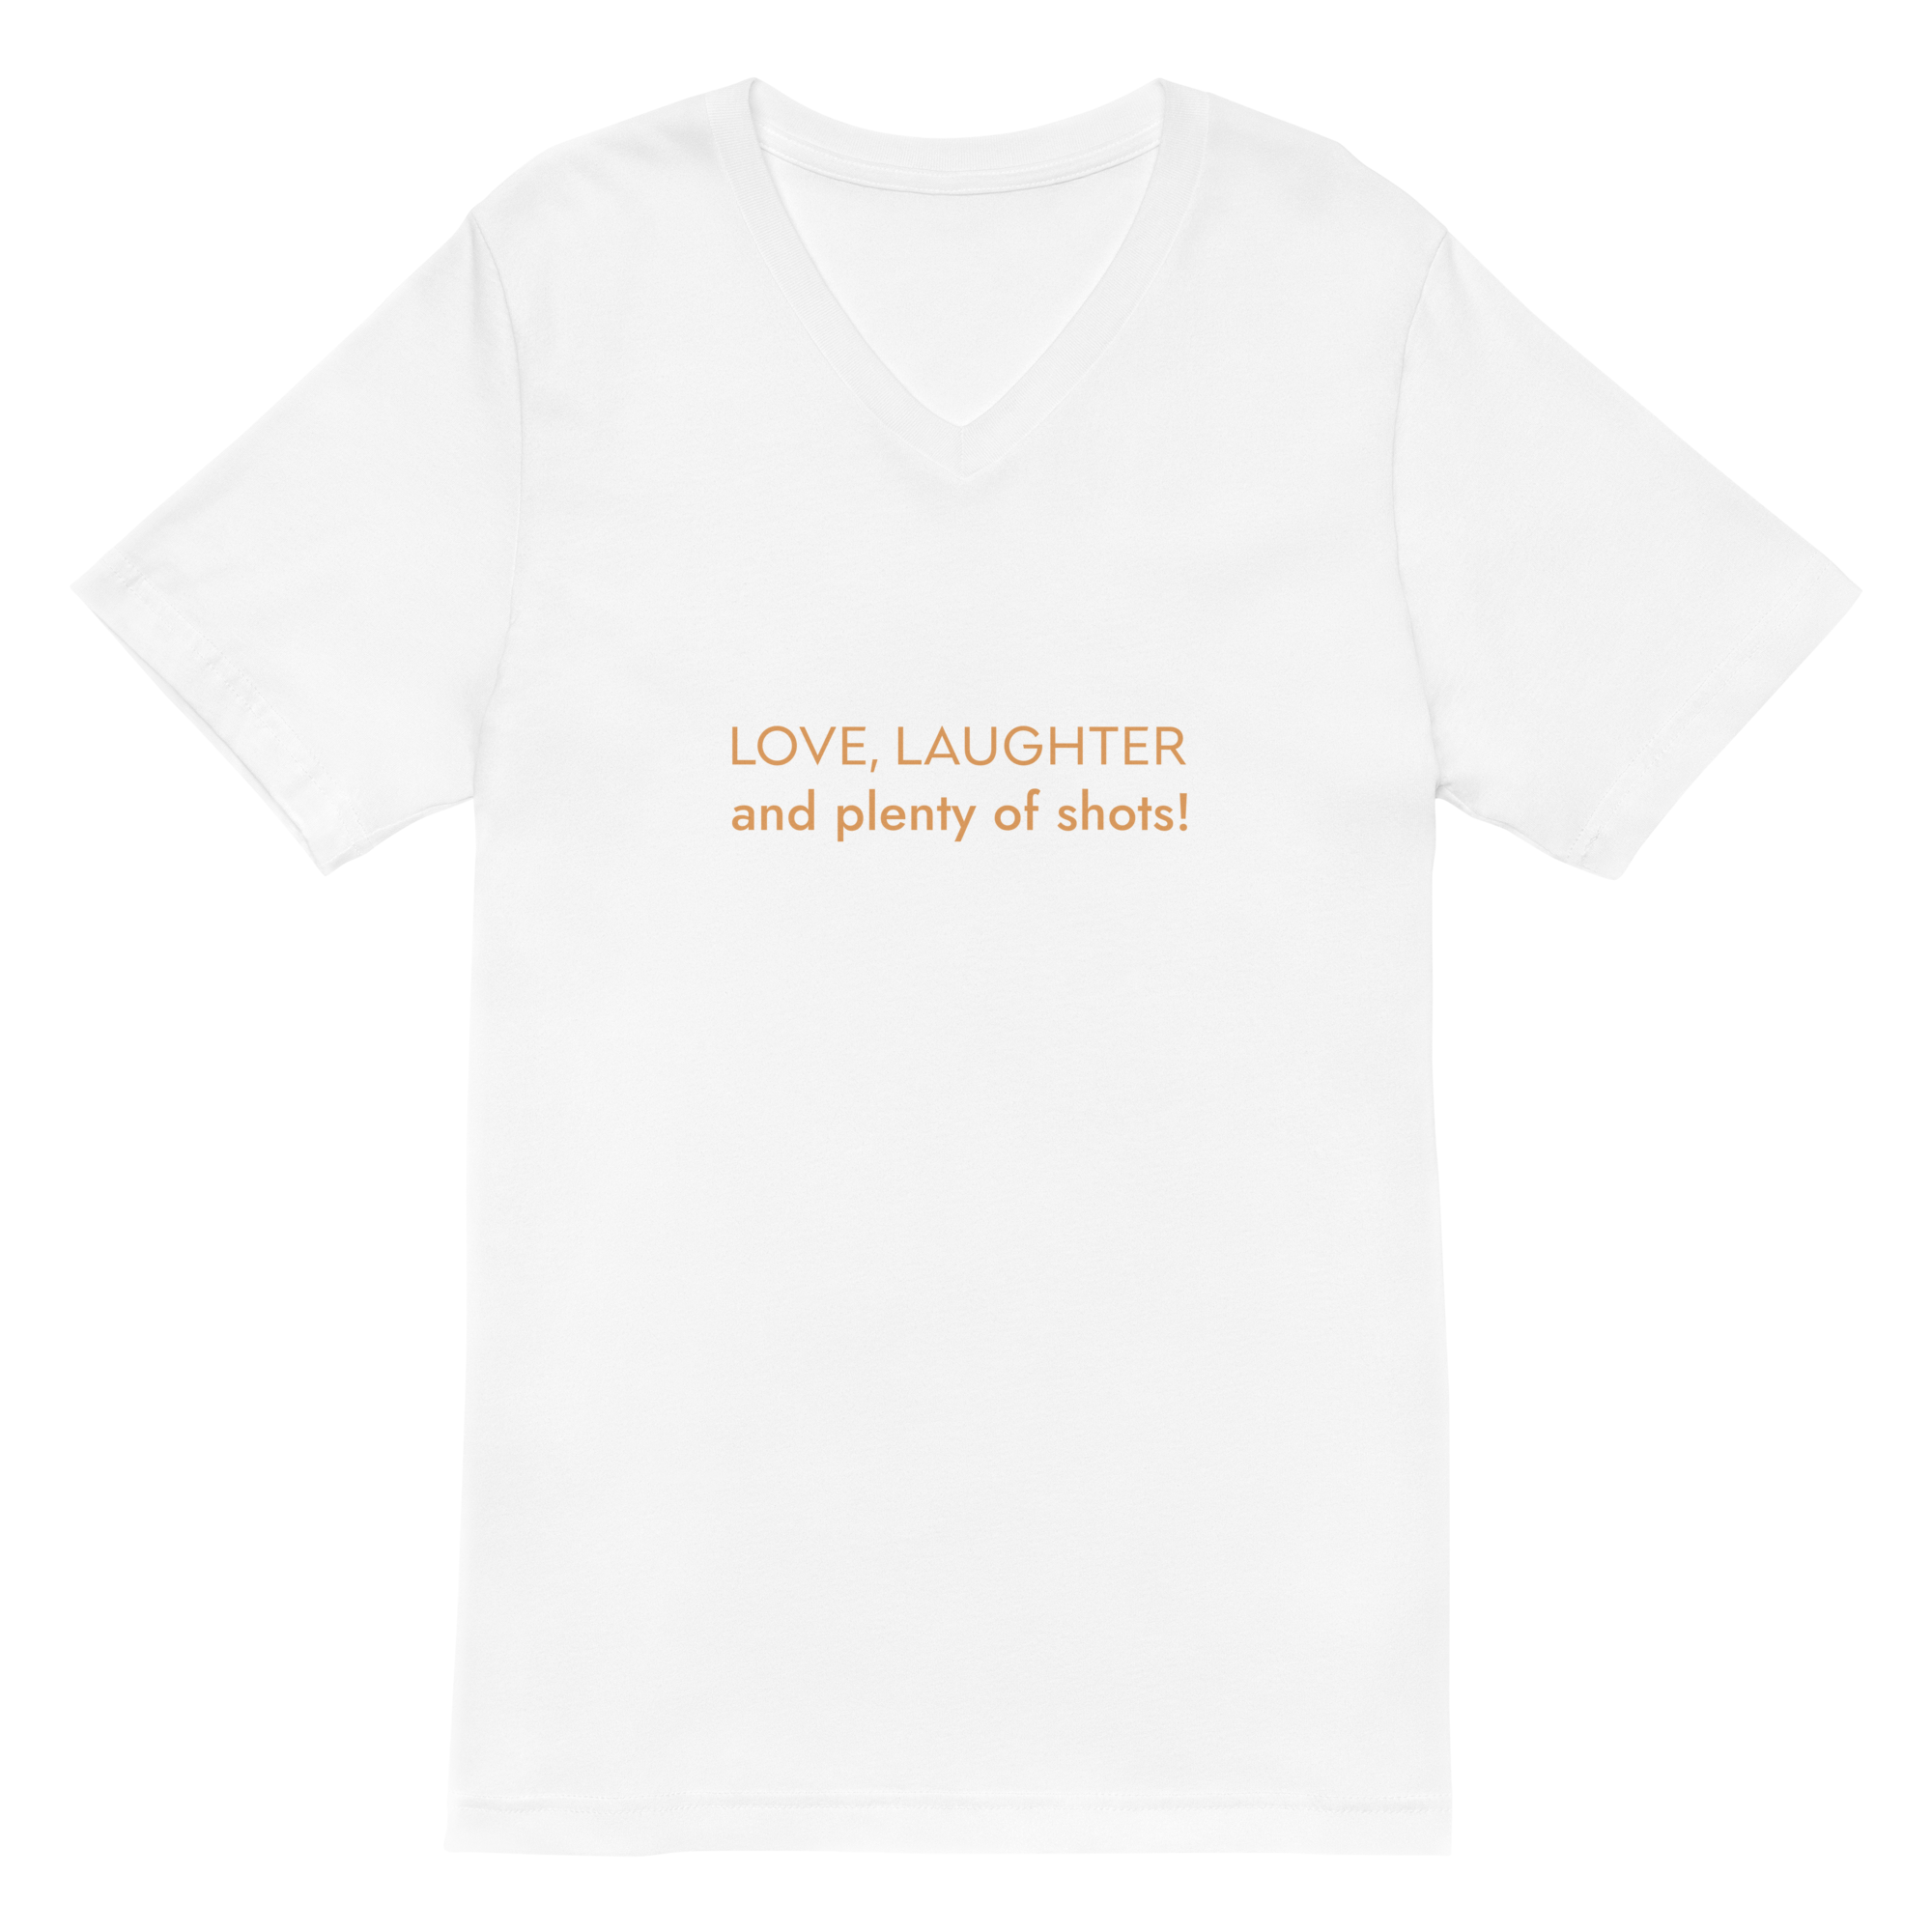 LOVE, LAUGHTER AND PLENTY OF SHOTS T-SHIRT